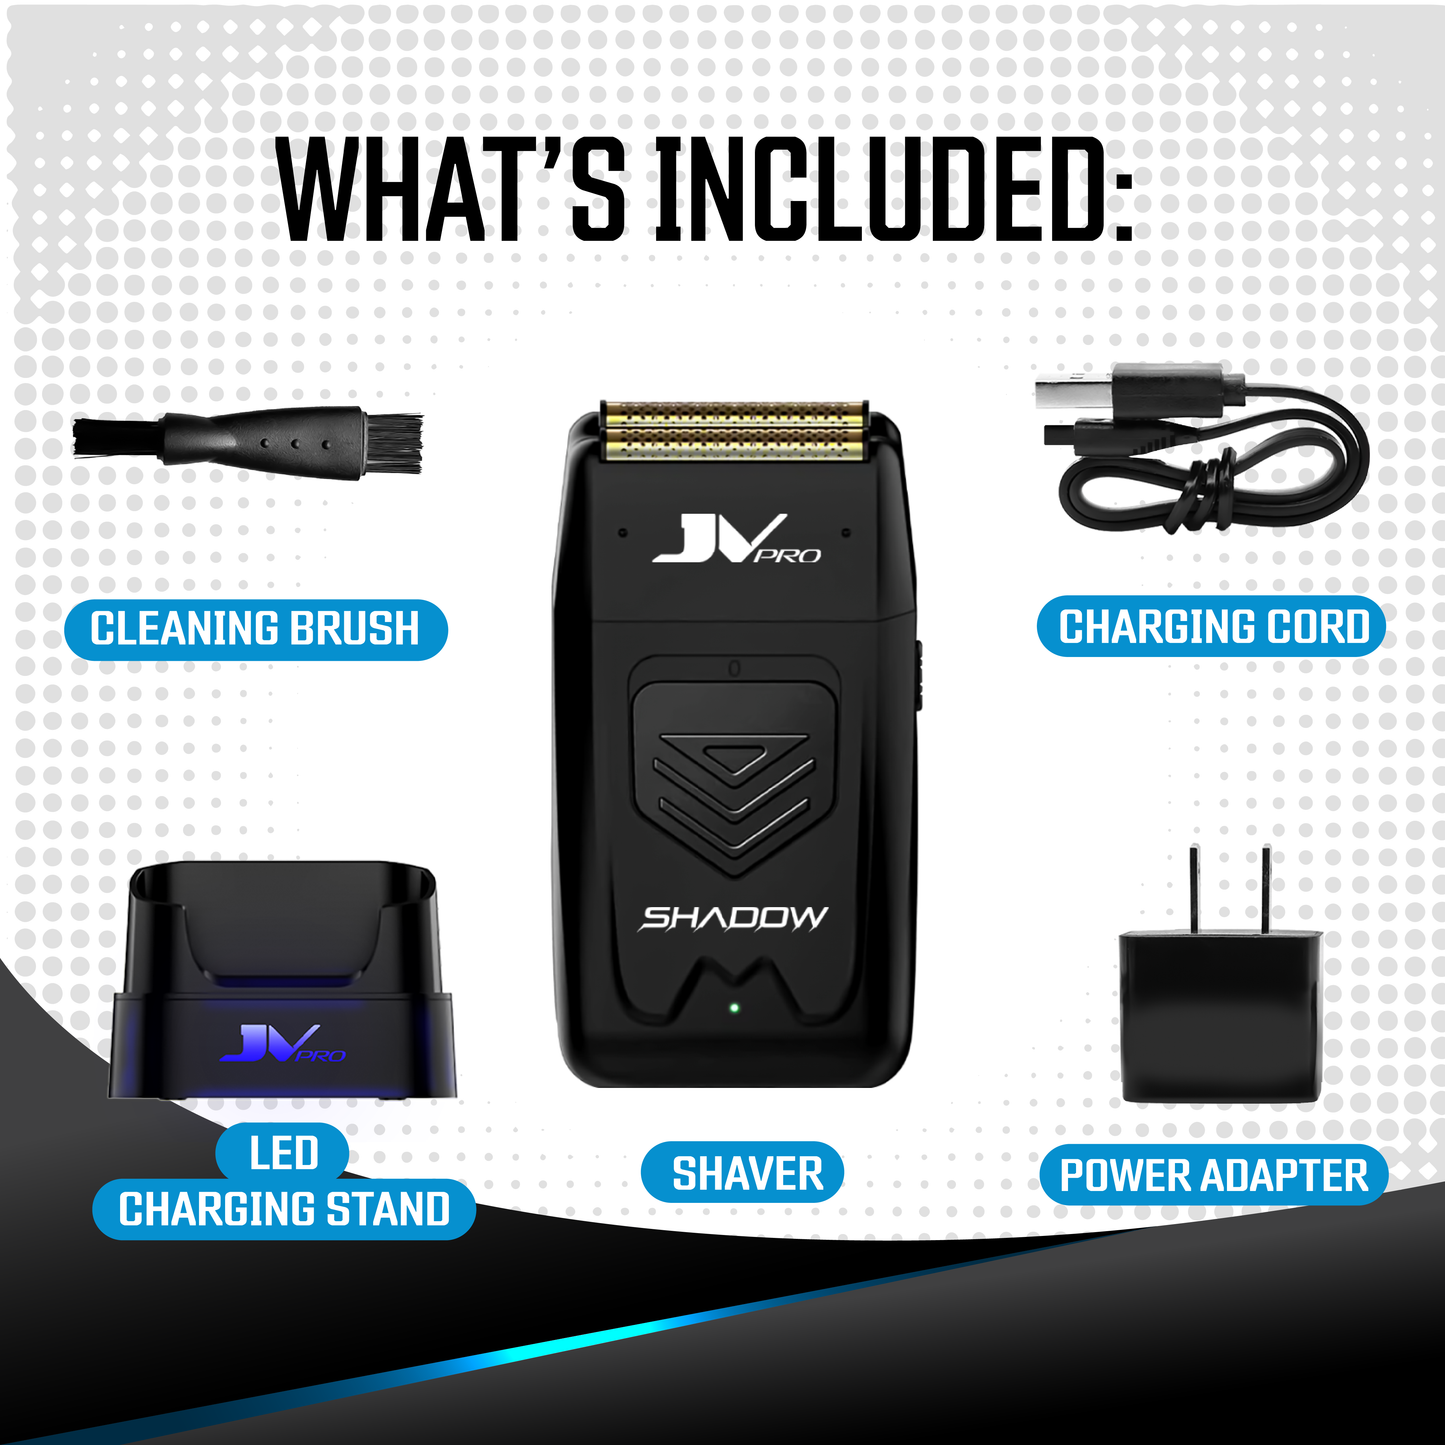 Compact JV-JV electric shaver with charger, perfect for on-the-go grooming.